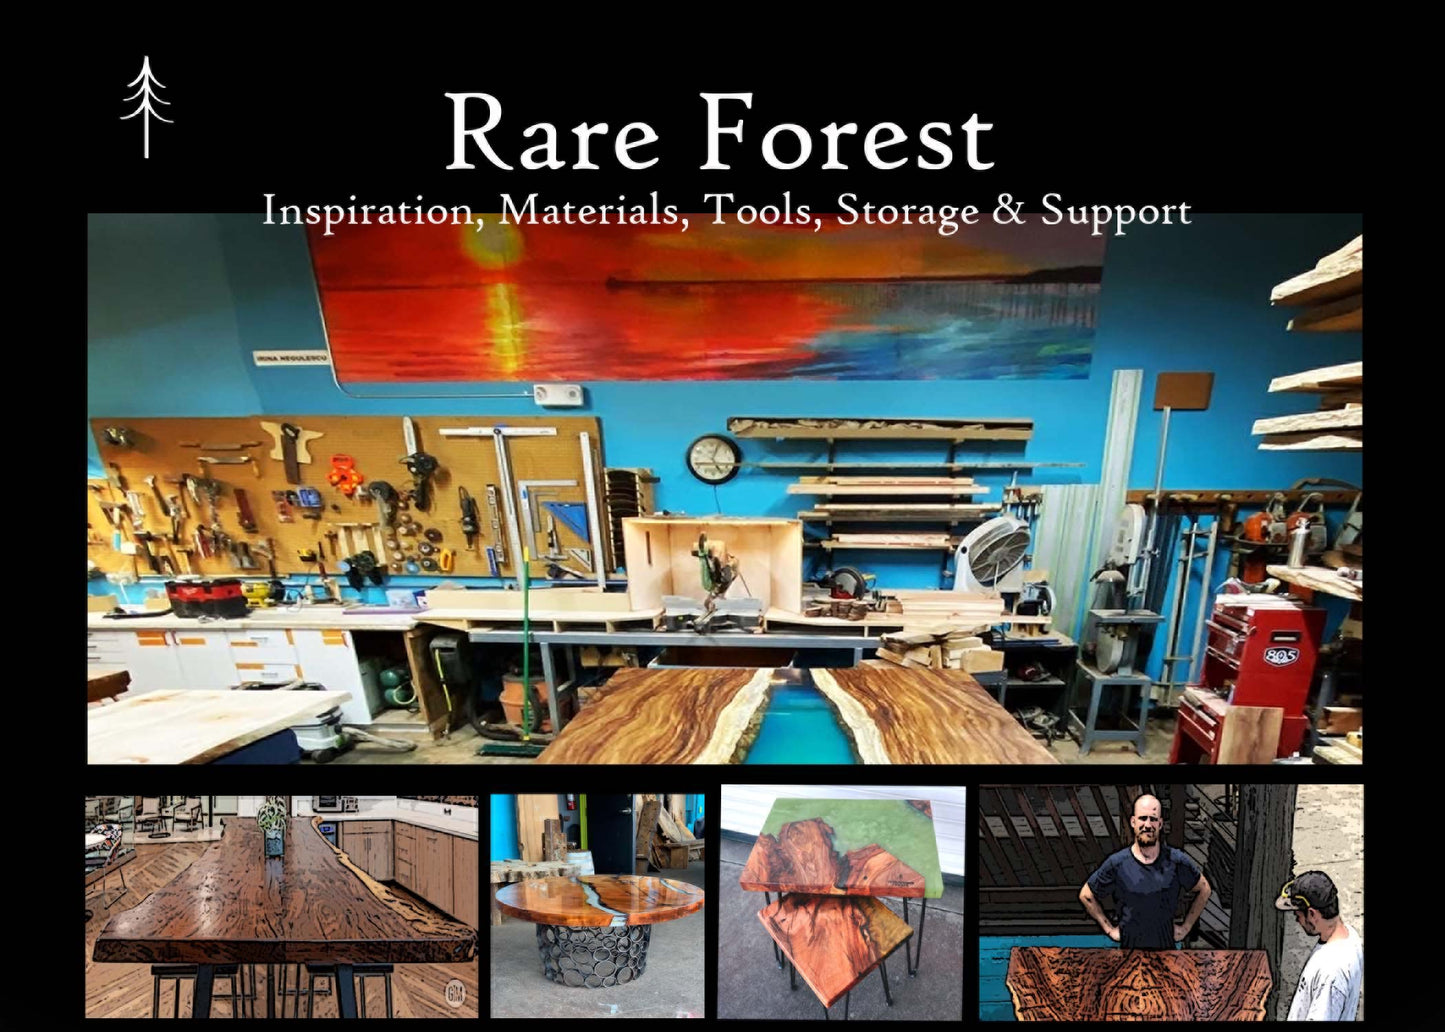 RARE FOREST:  3 MONTH MEMBERSHIP. In this membership you will have access to the rarest woods like: White Oak, Cherry, Maple, Walnut, Douglas Fir, Redwood, Cedar and other woods in this price range.